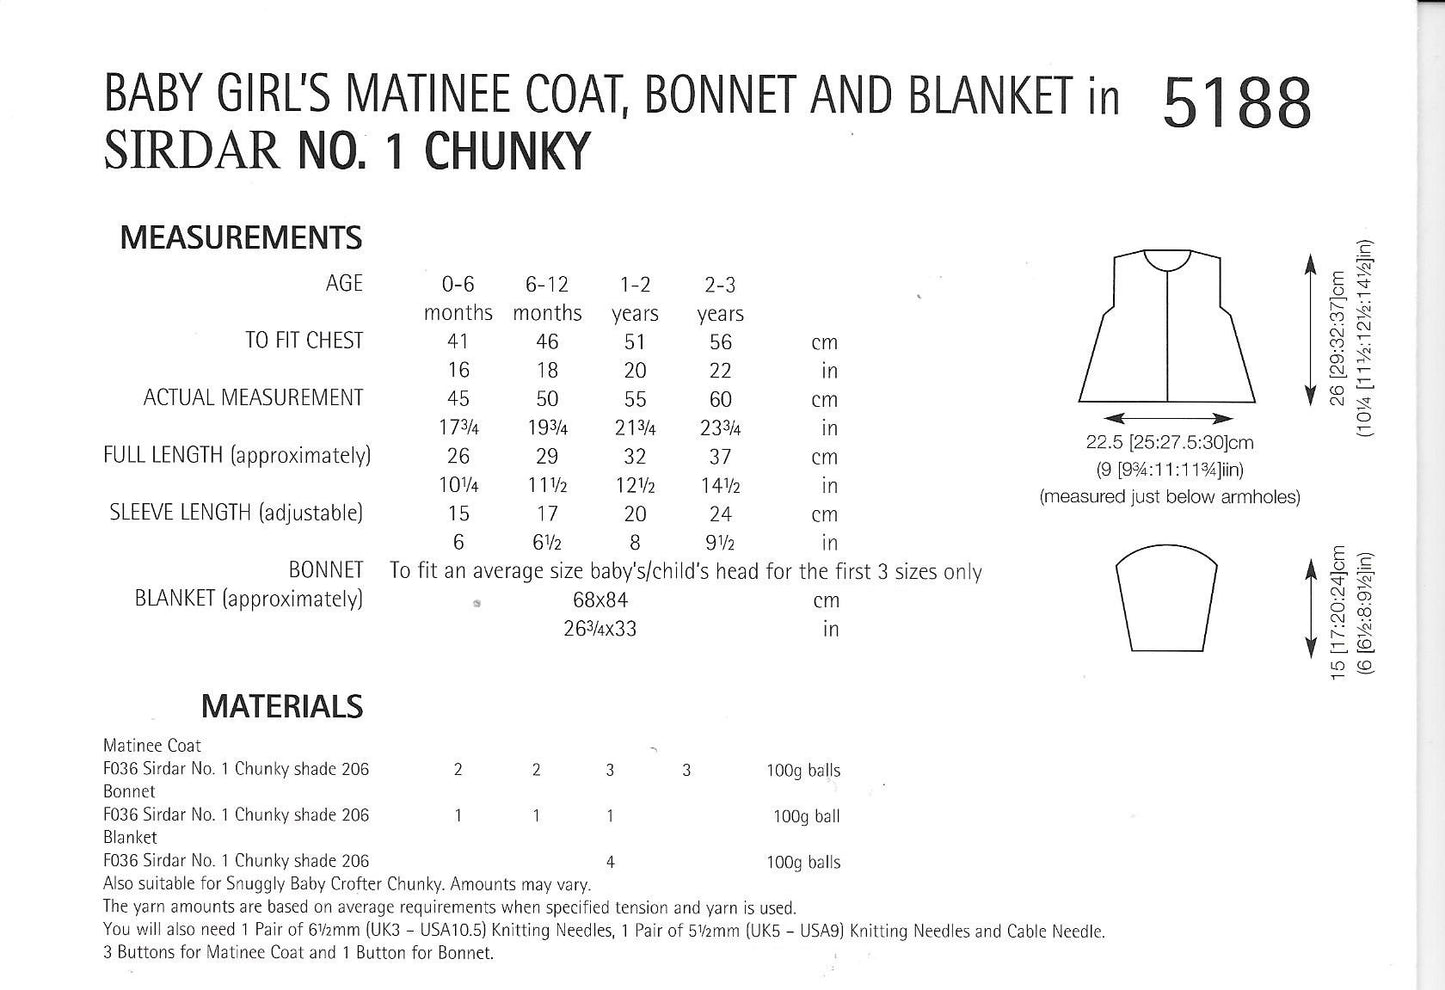 5188 Sirdar No. 1 chunky matinee jacket, bonnet and blanket knitting pattern